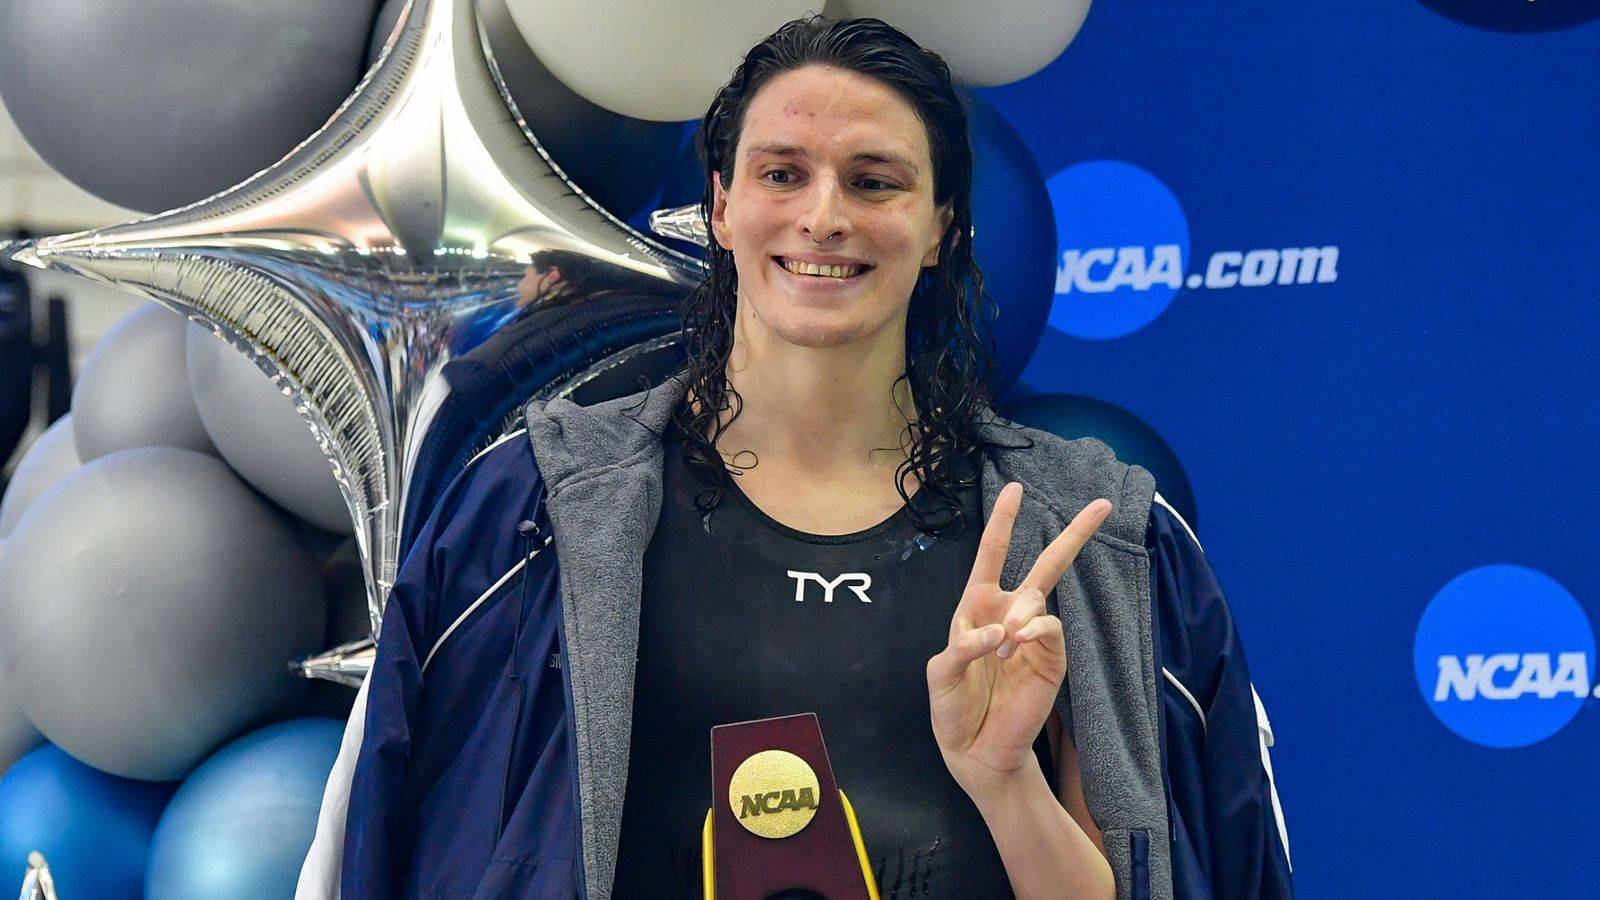 Florida governor refuses to recognise transgender swimmer Lia Thomas’s win